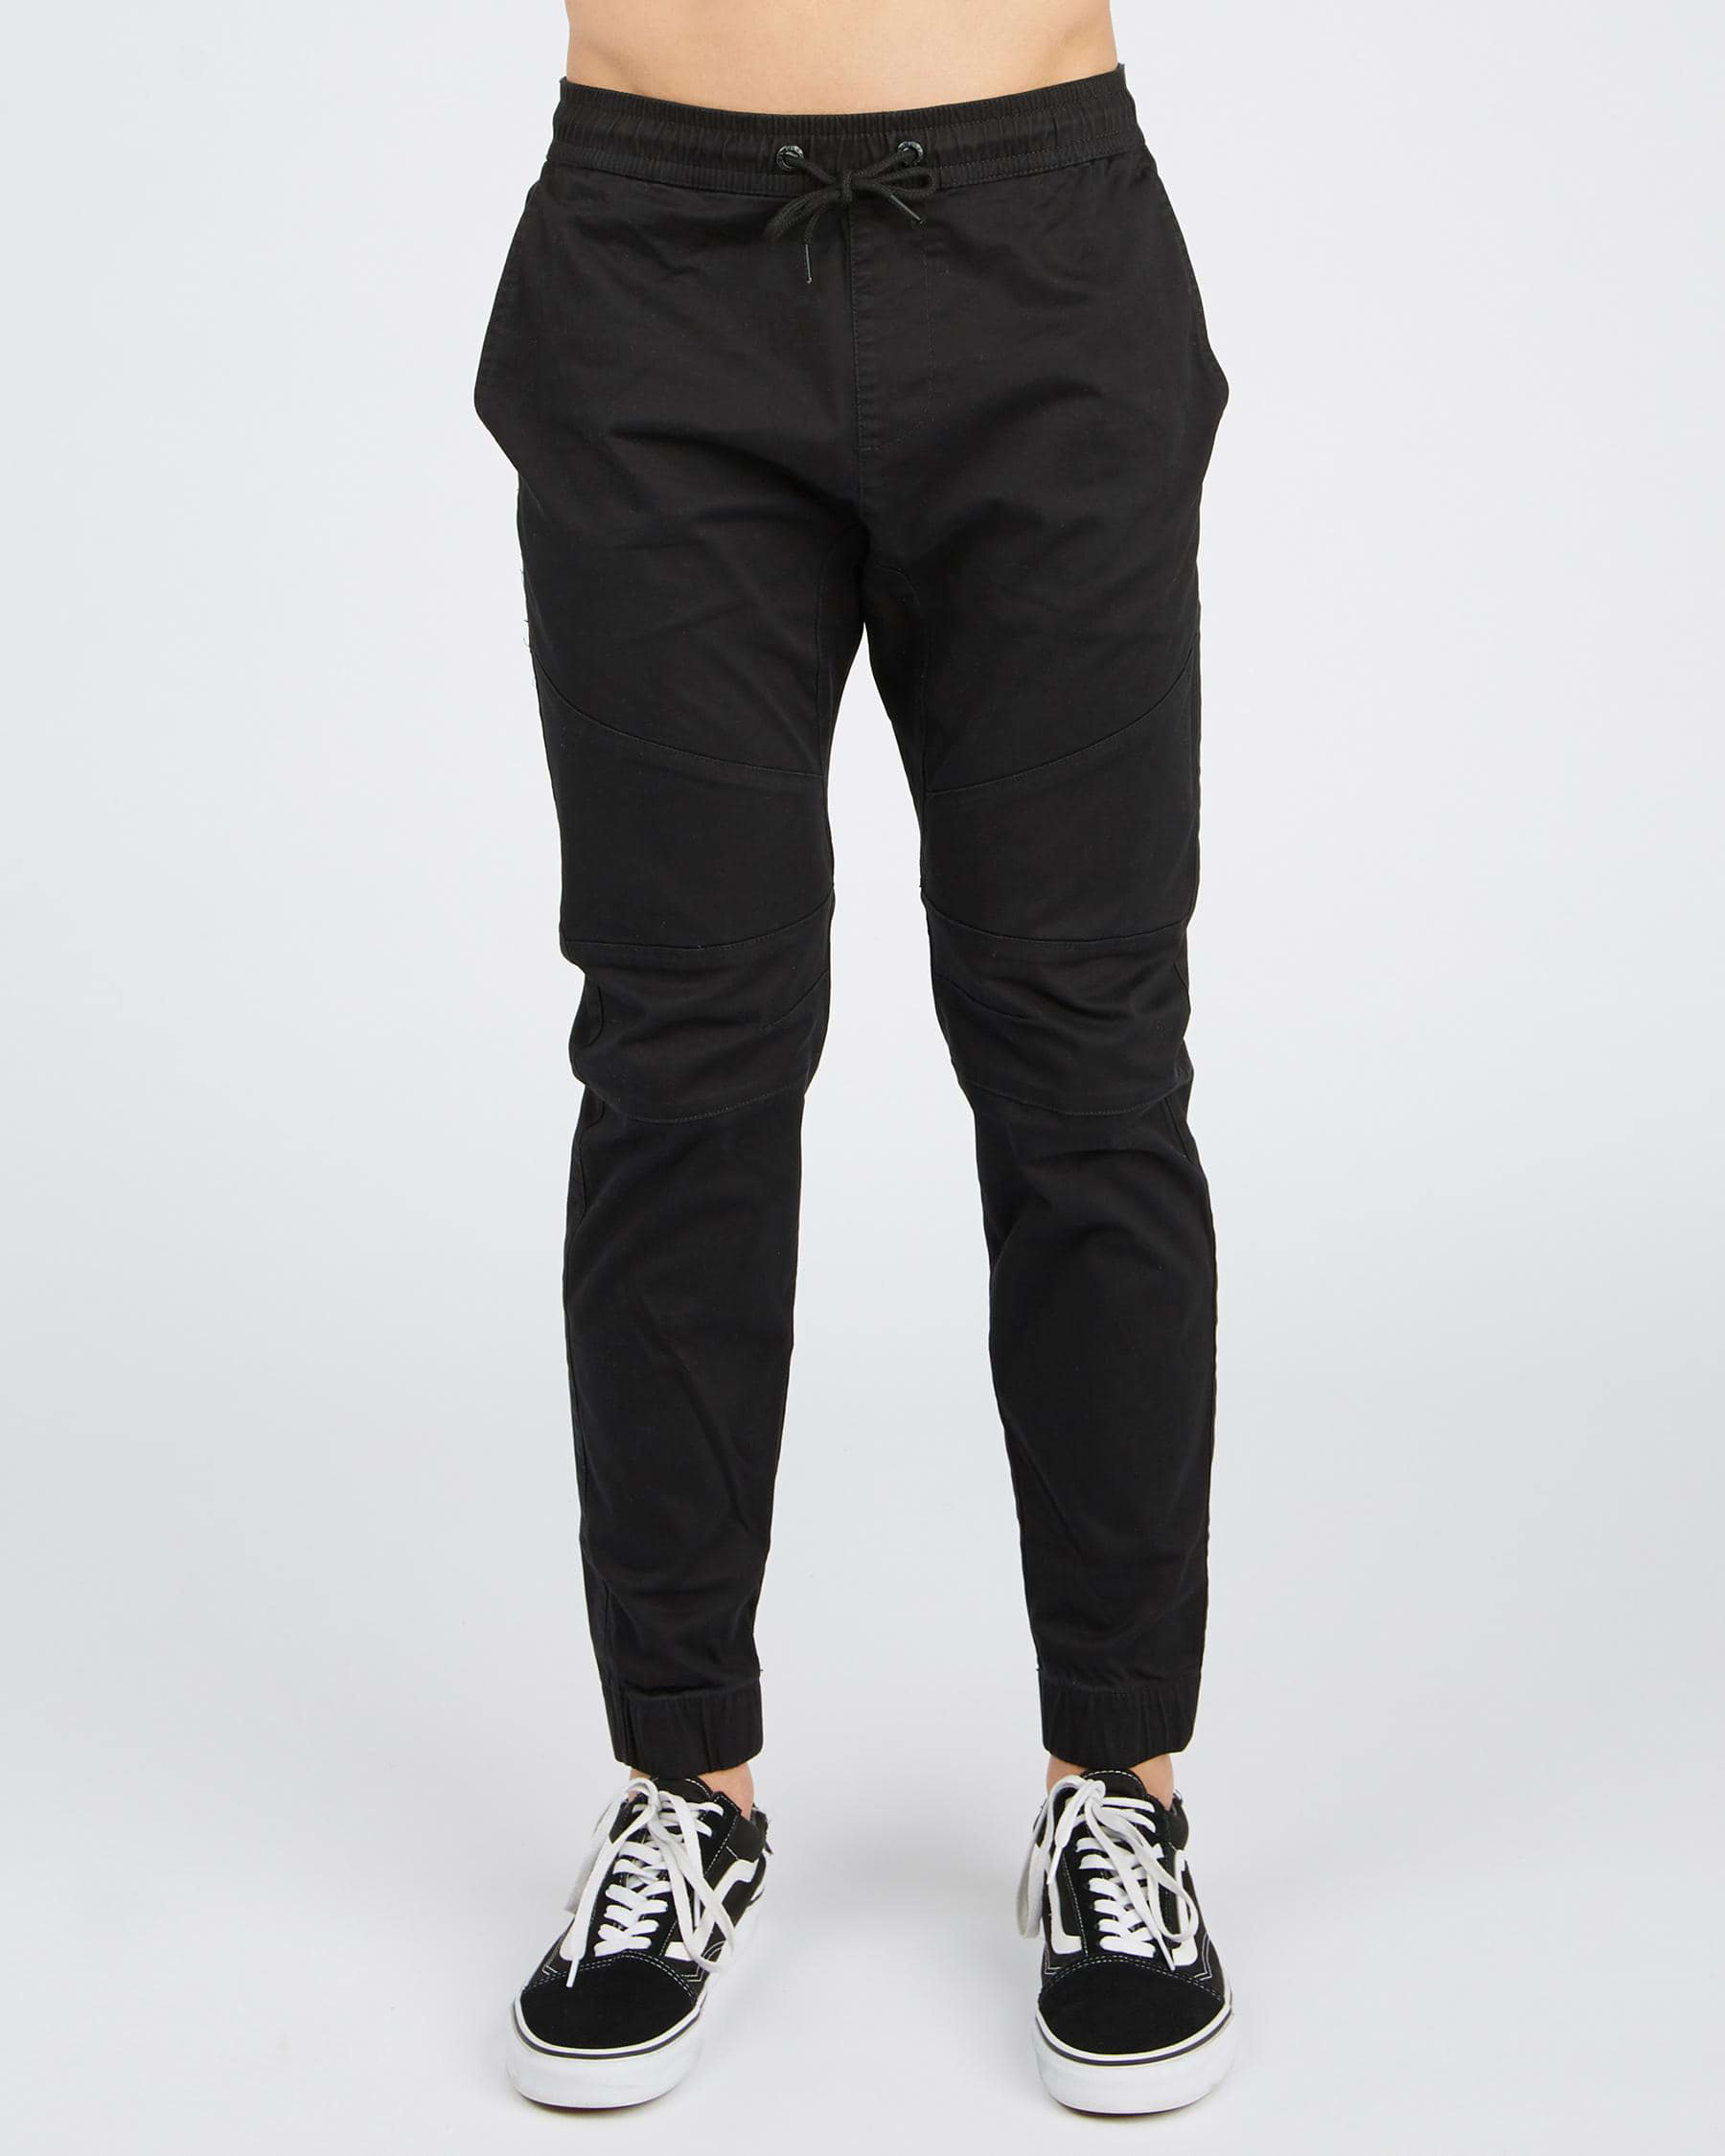 Shop Lucid Tyrant Jogger Pants In Black - Fast Shipping & Easy Returns ...